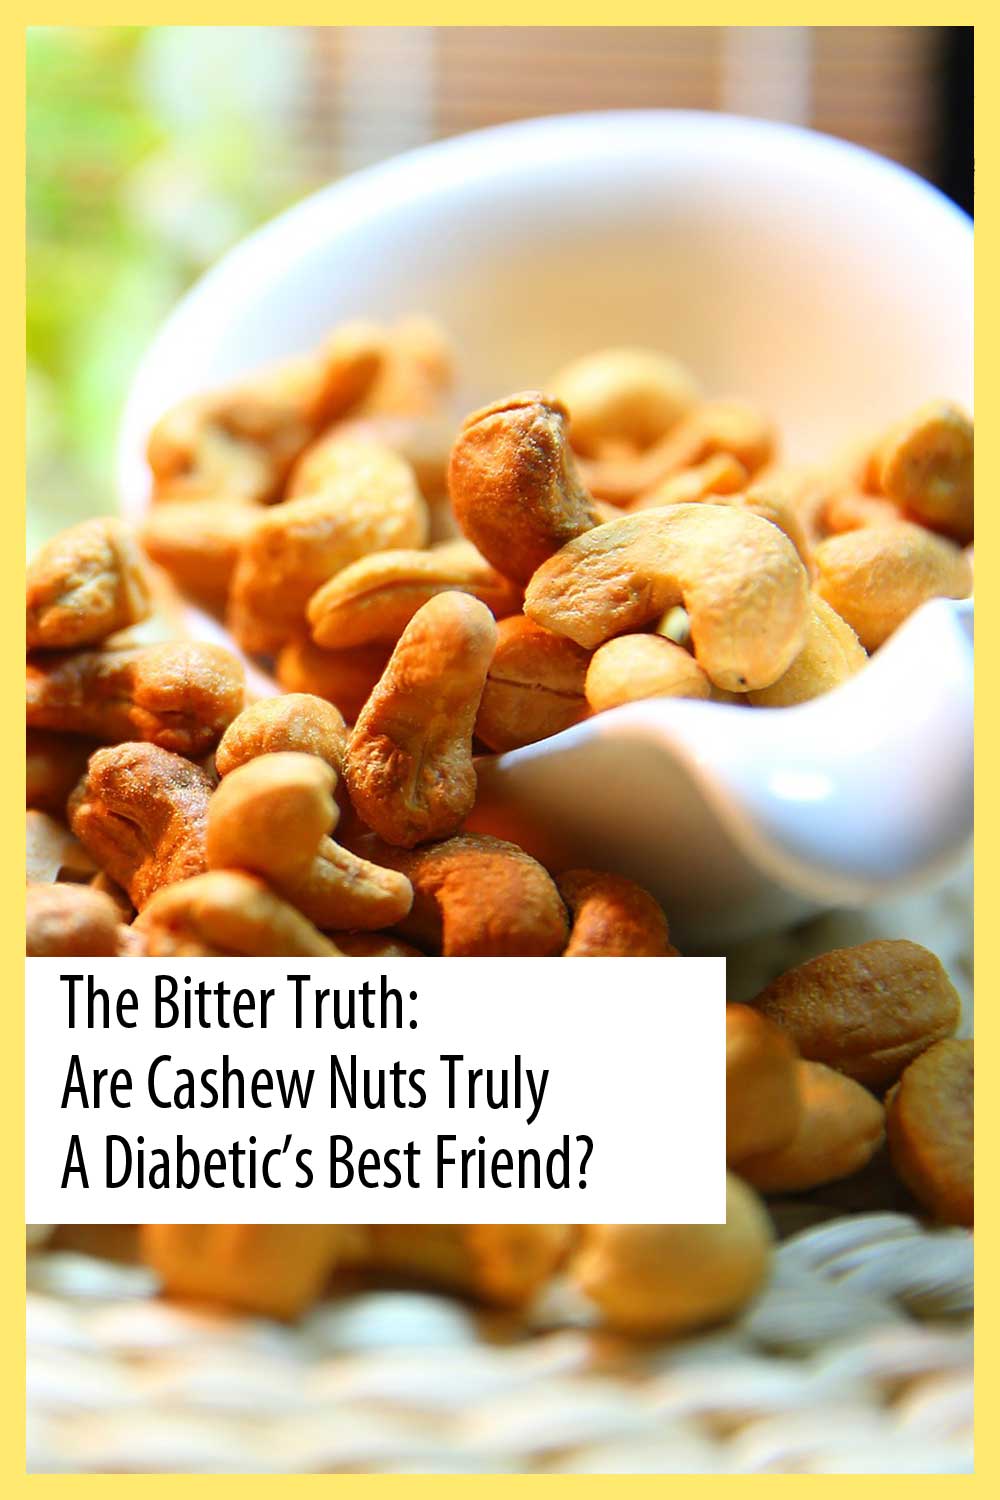 The Bitter Truth: Are Cashew Nuts Truly a Diabetic's Best Friend?